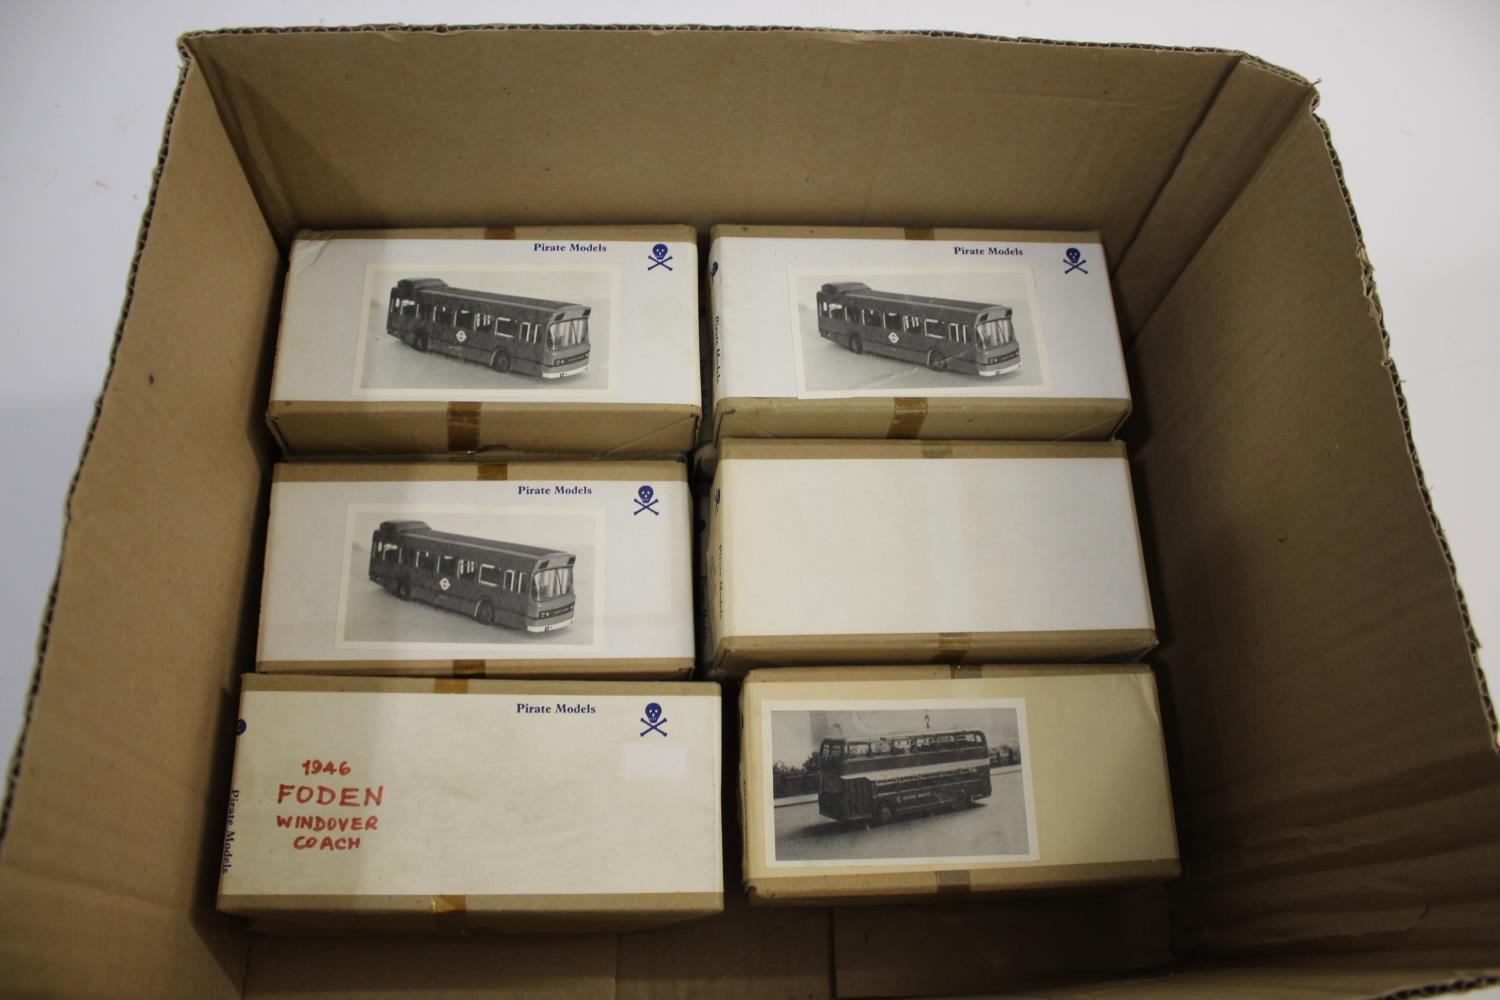 PIRATE MODELS - BOXED BUS KITS 14 boxed metal kits by Pirate Models, most look unused. Including